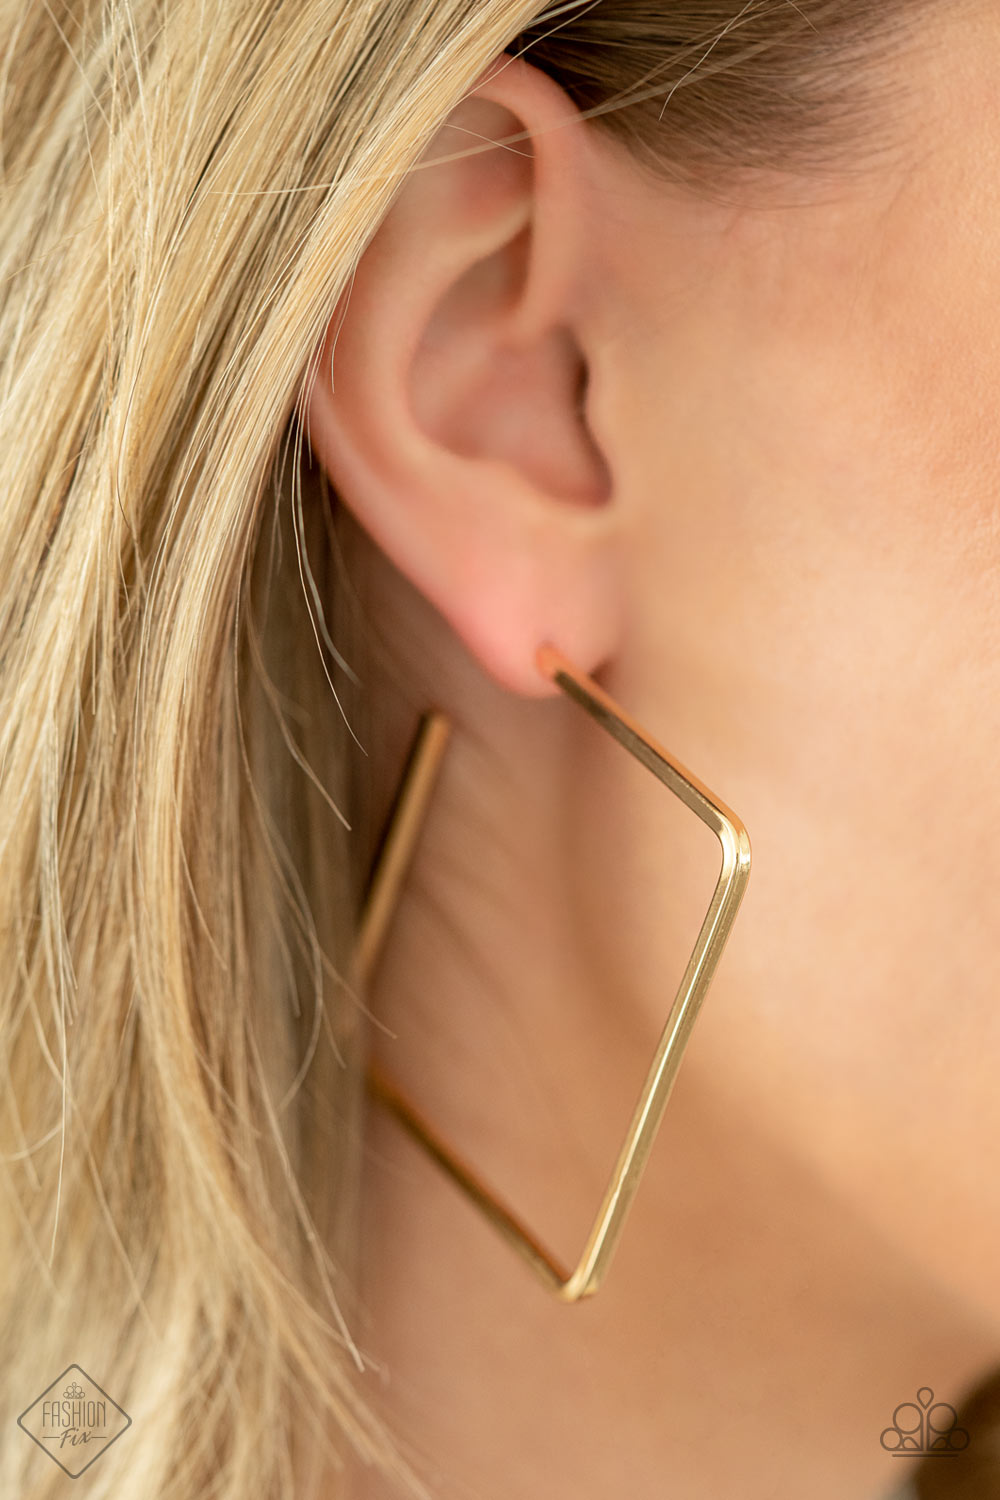 Material Girl Magic - Gold Square Hoop Earrings - Paparazzi Accessories - Simple square frame is tilted on point to create a geometric hoop. Its sharp angles are complemented by its rich gold finish, making a lasting impression. Earring attaches to a standard post fitting. Hoop measures approximately 2" in diameter. Sold as one pair of hoop earrings.